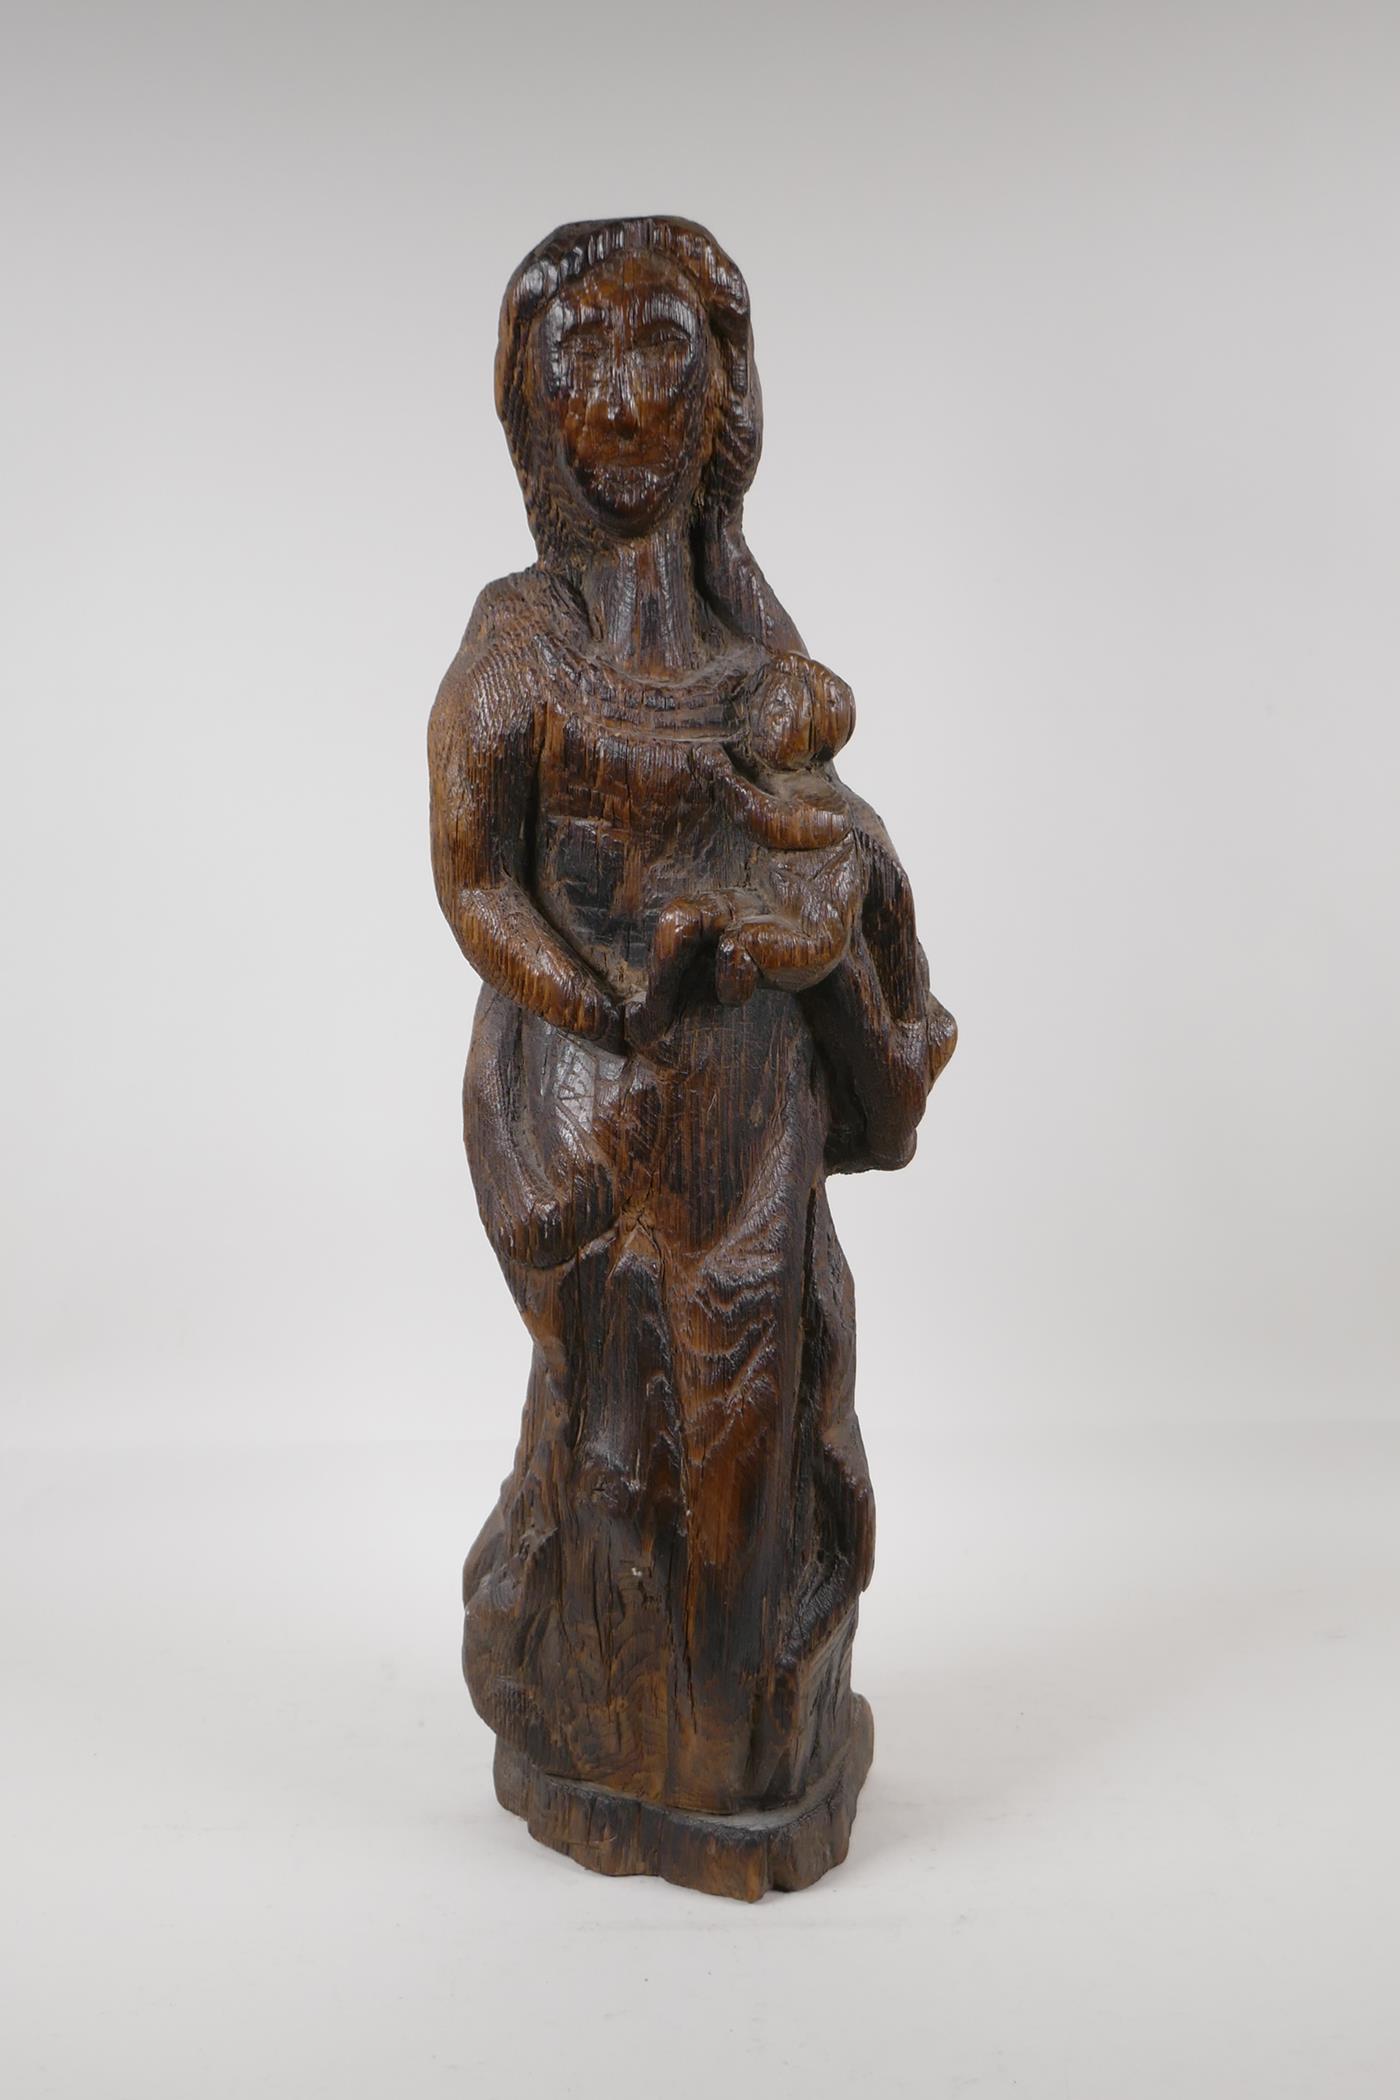 An antique oak carving of the Madonna & Child, 22" high